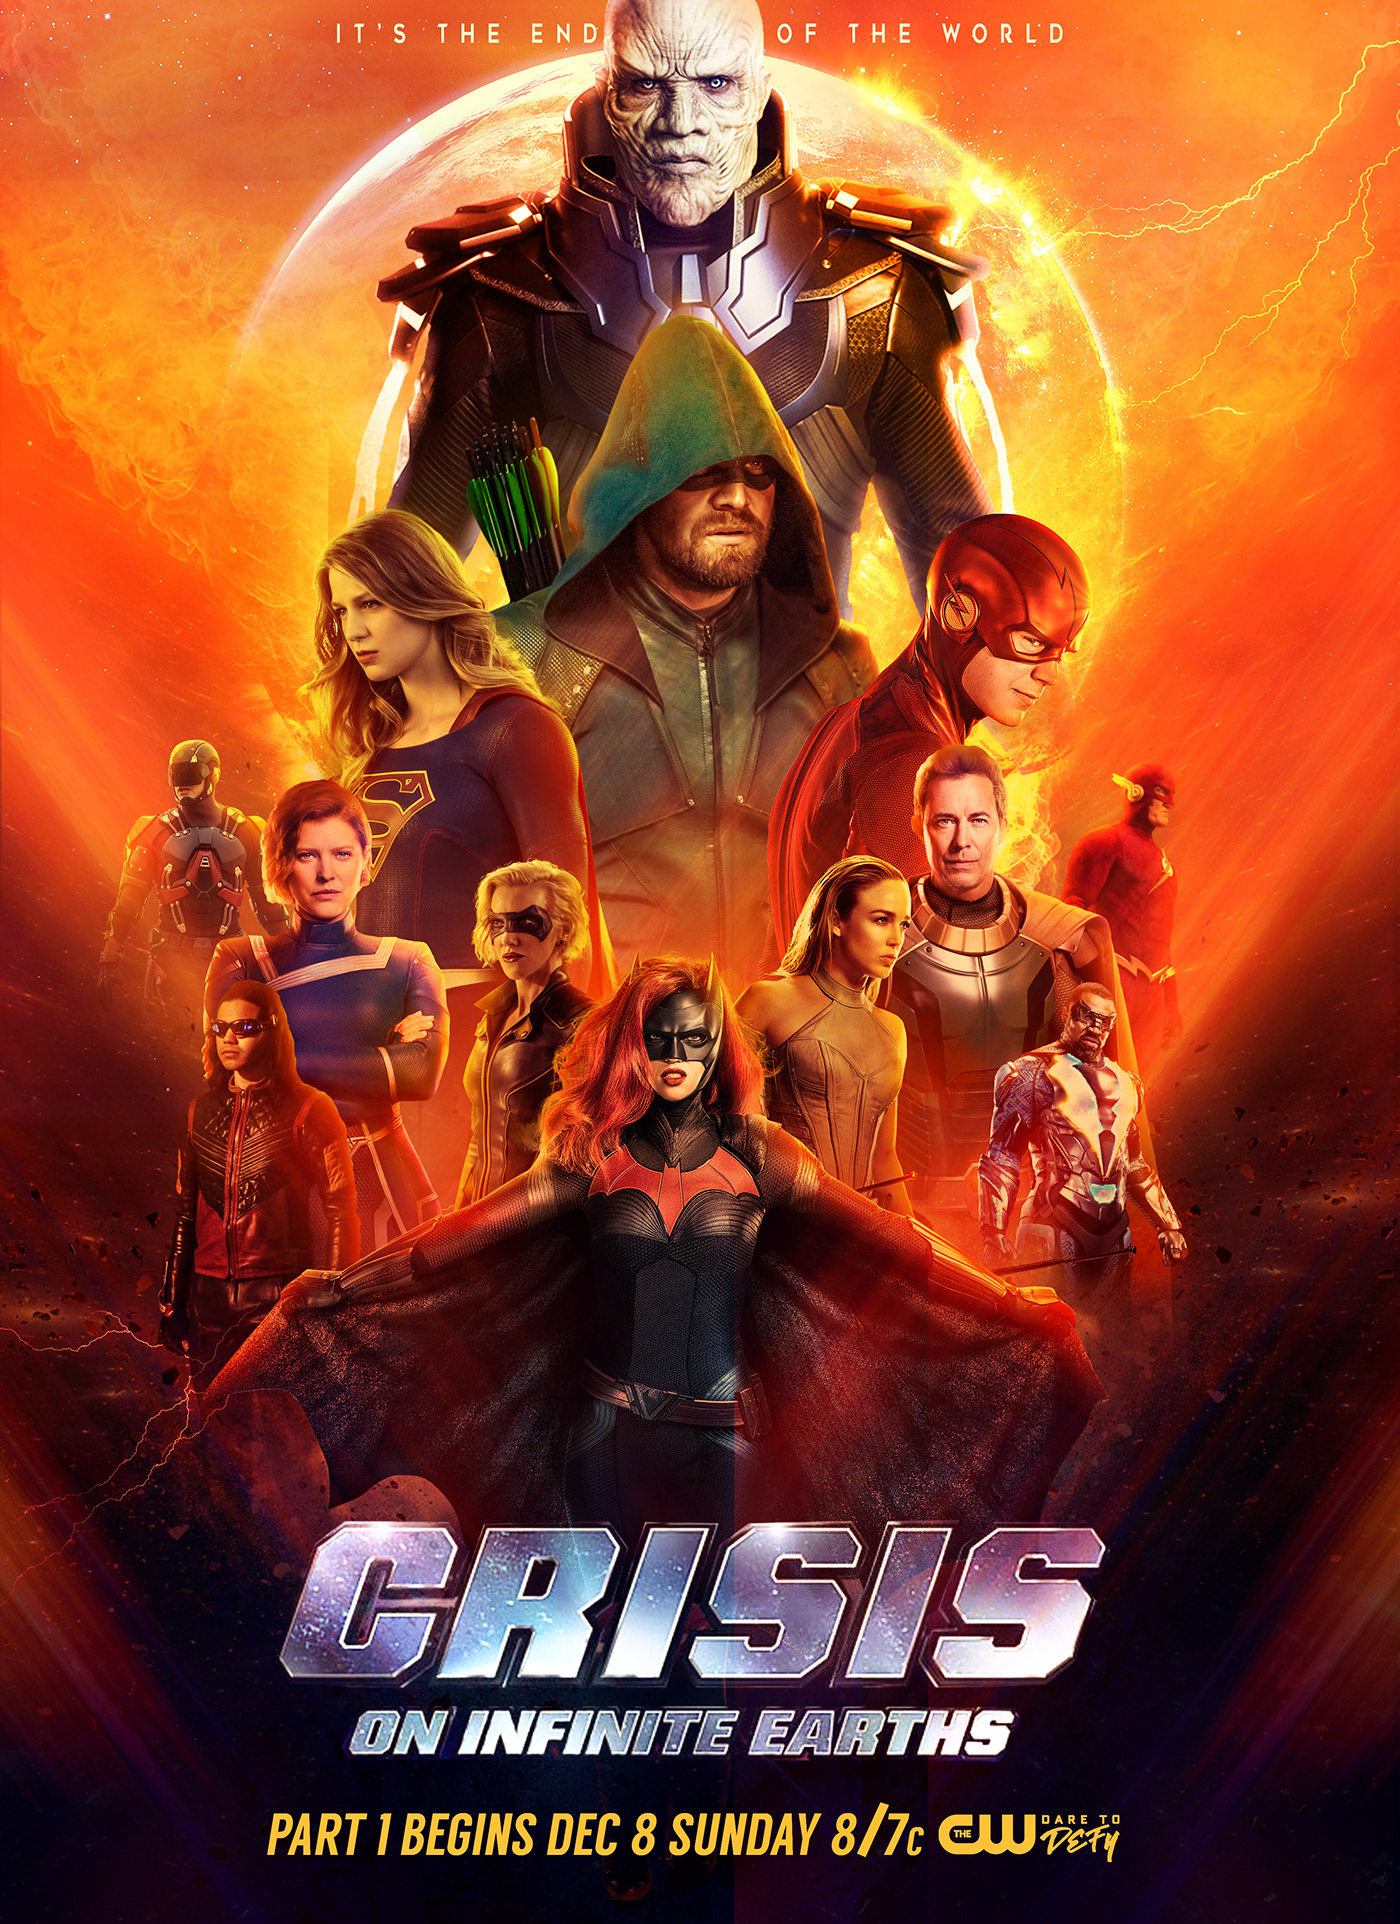 Crisis on infinity earths Poster art (unofficial) .